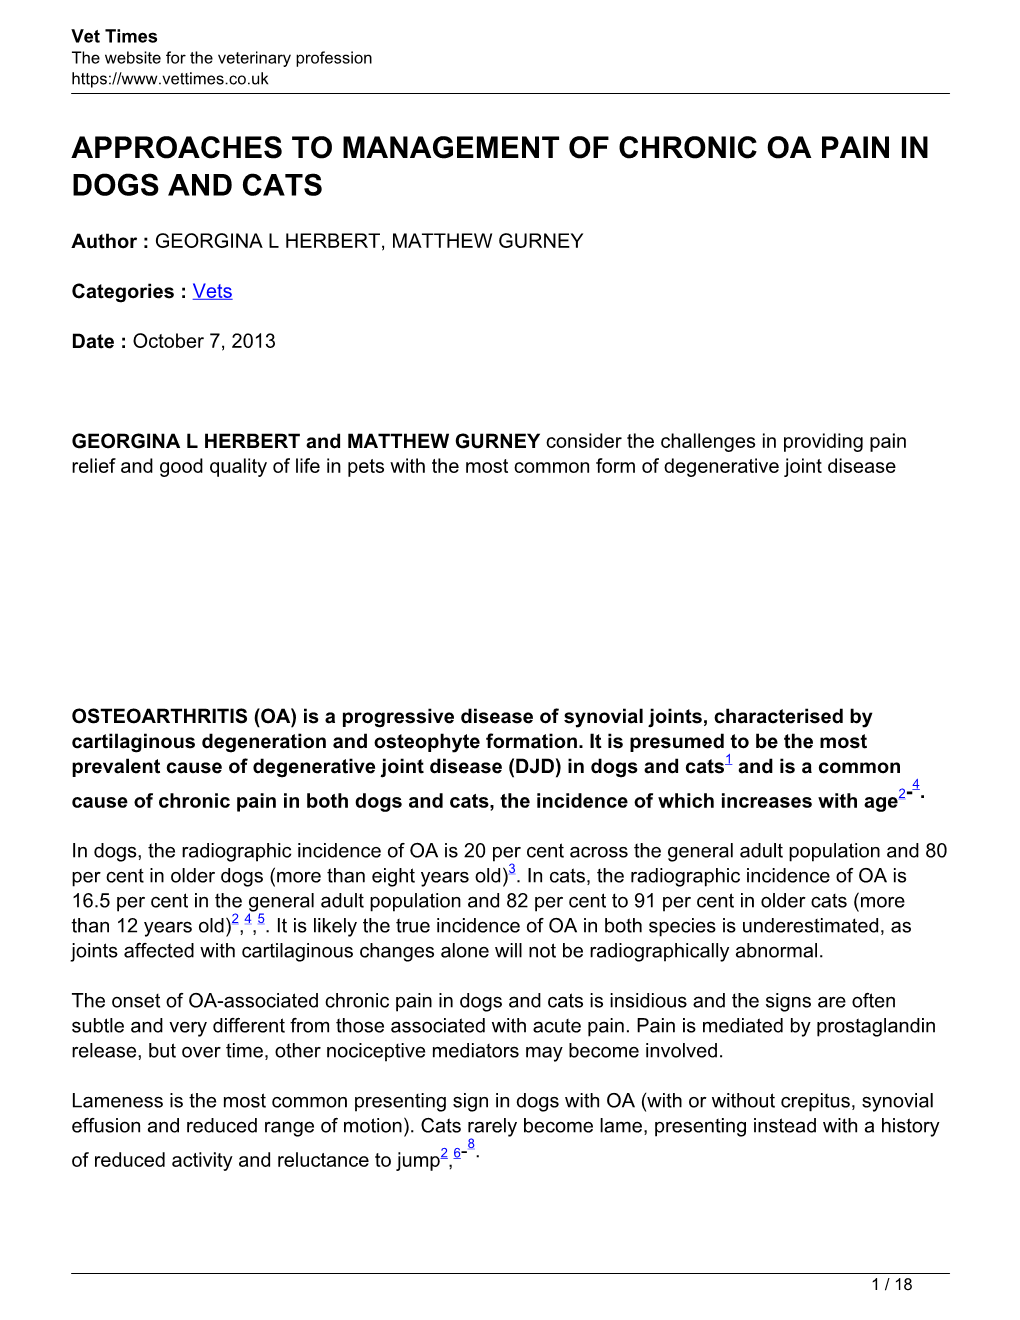 Approaches to Management of Chronic Oa Pain in Dogs and Cats